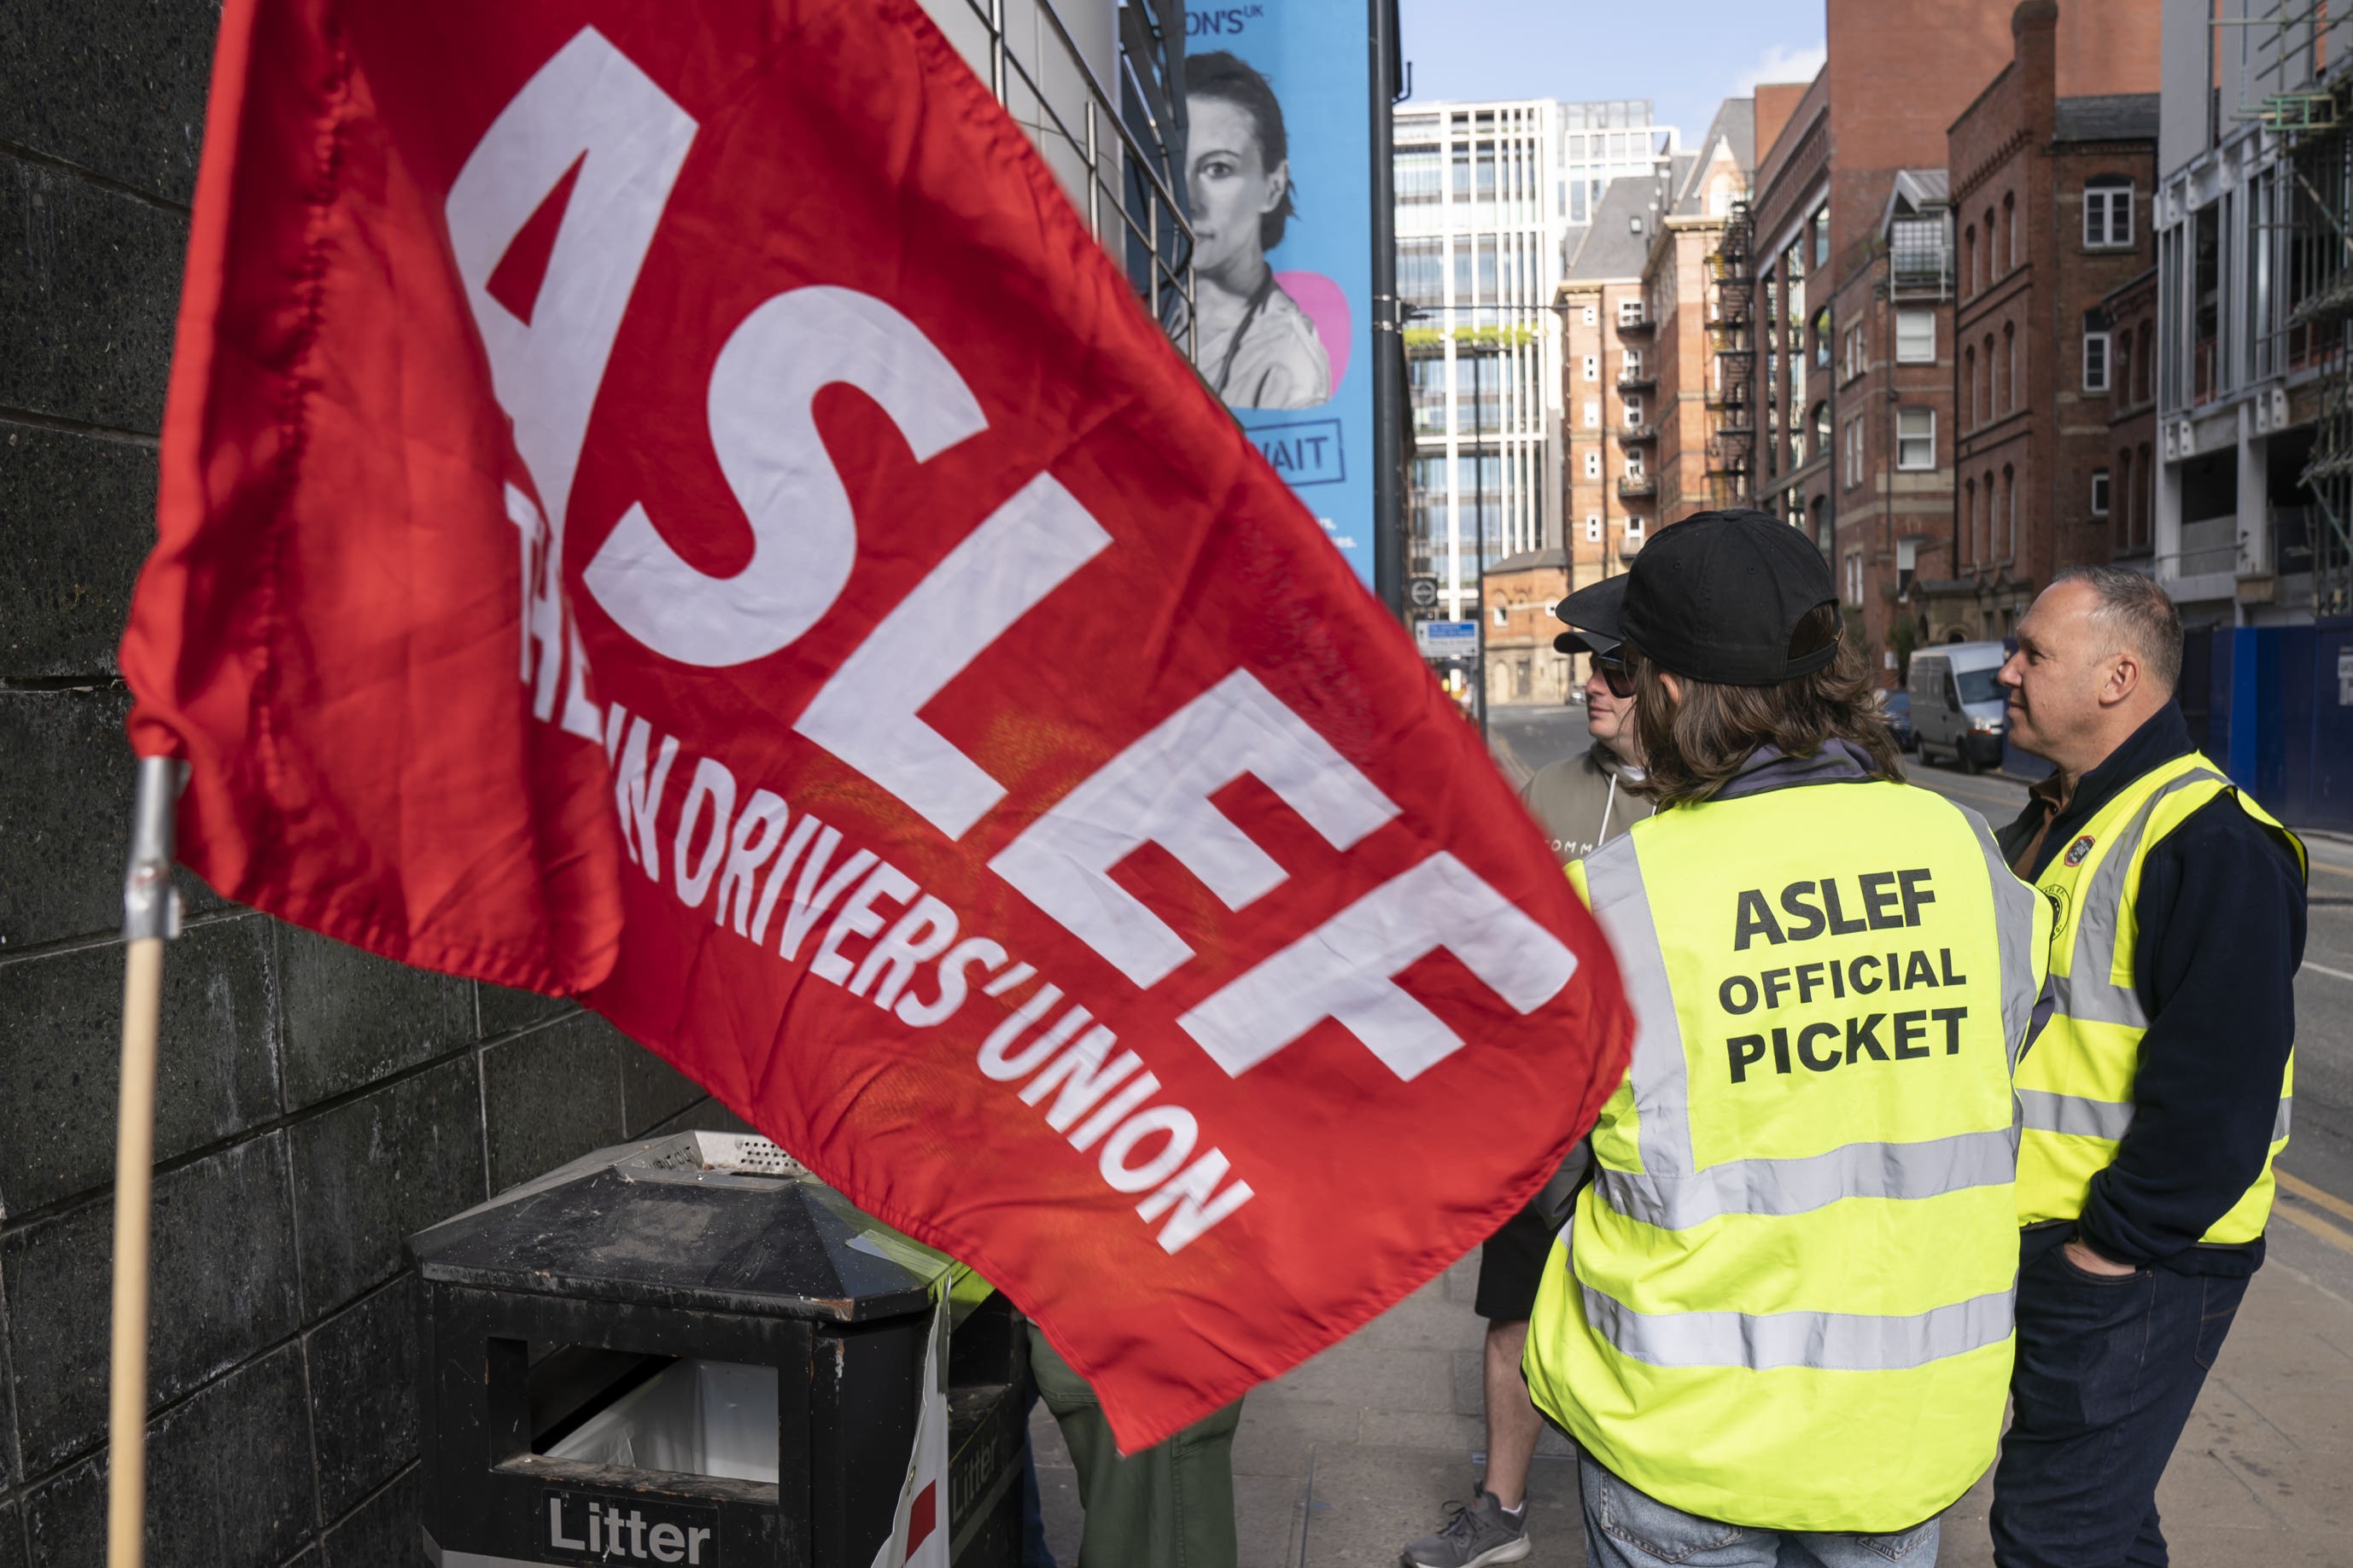 Members of the Aslef union on a picket line near Leeds railway station (Danny Lawson/PA)